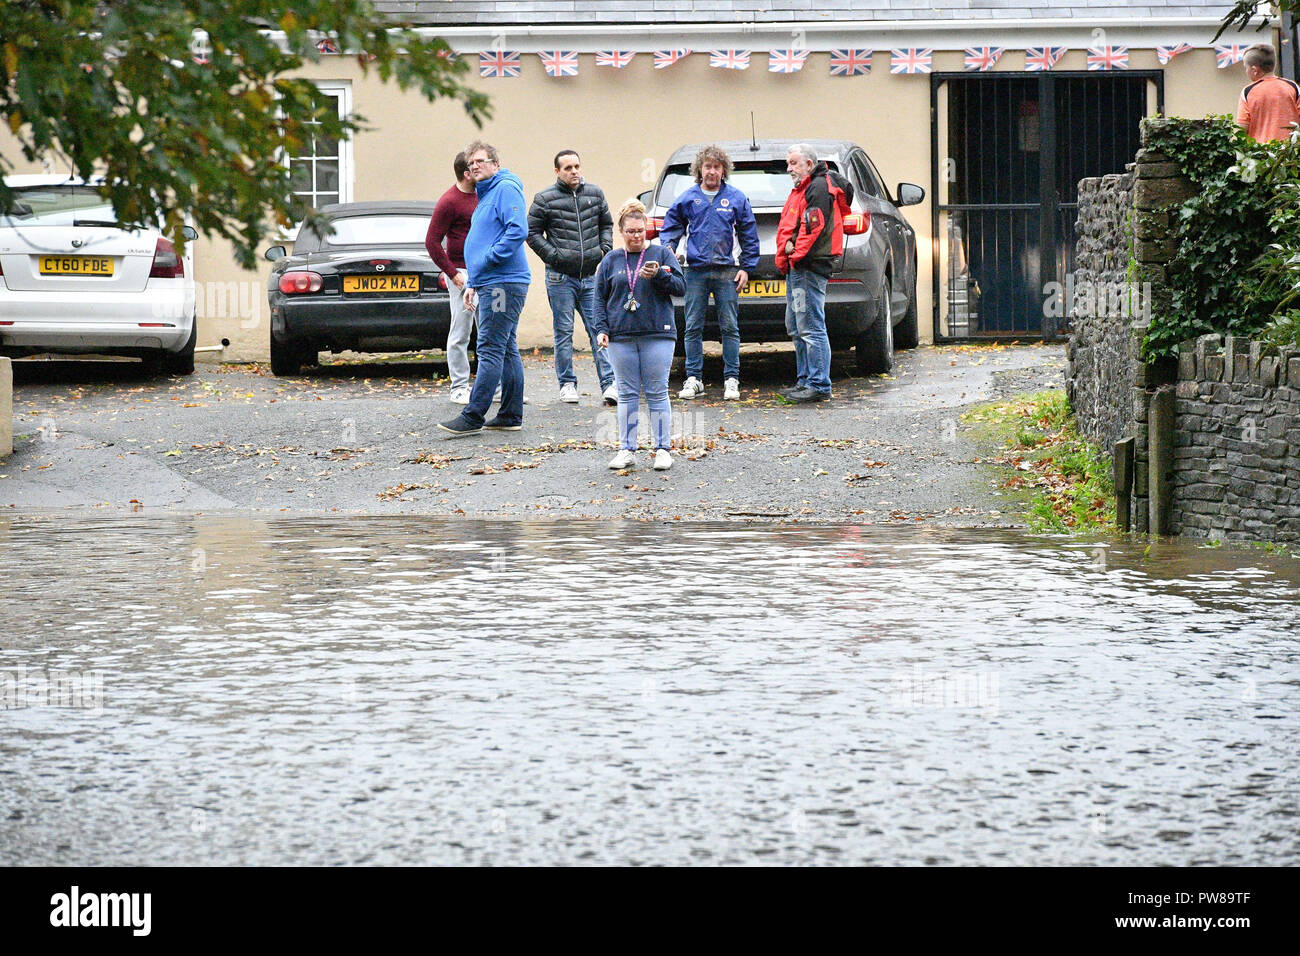 People check floodwater blocking the road to the Aberdulais Royal British Legion club in Aberdulais, Neath, South Wales, where an amber weather warning is in force across the region as heavy rain is causing flooding. Stock Photo